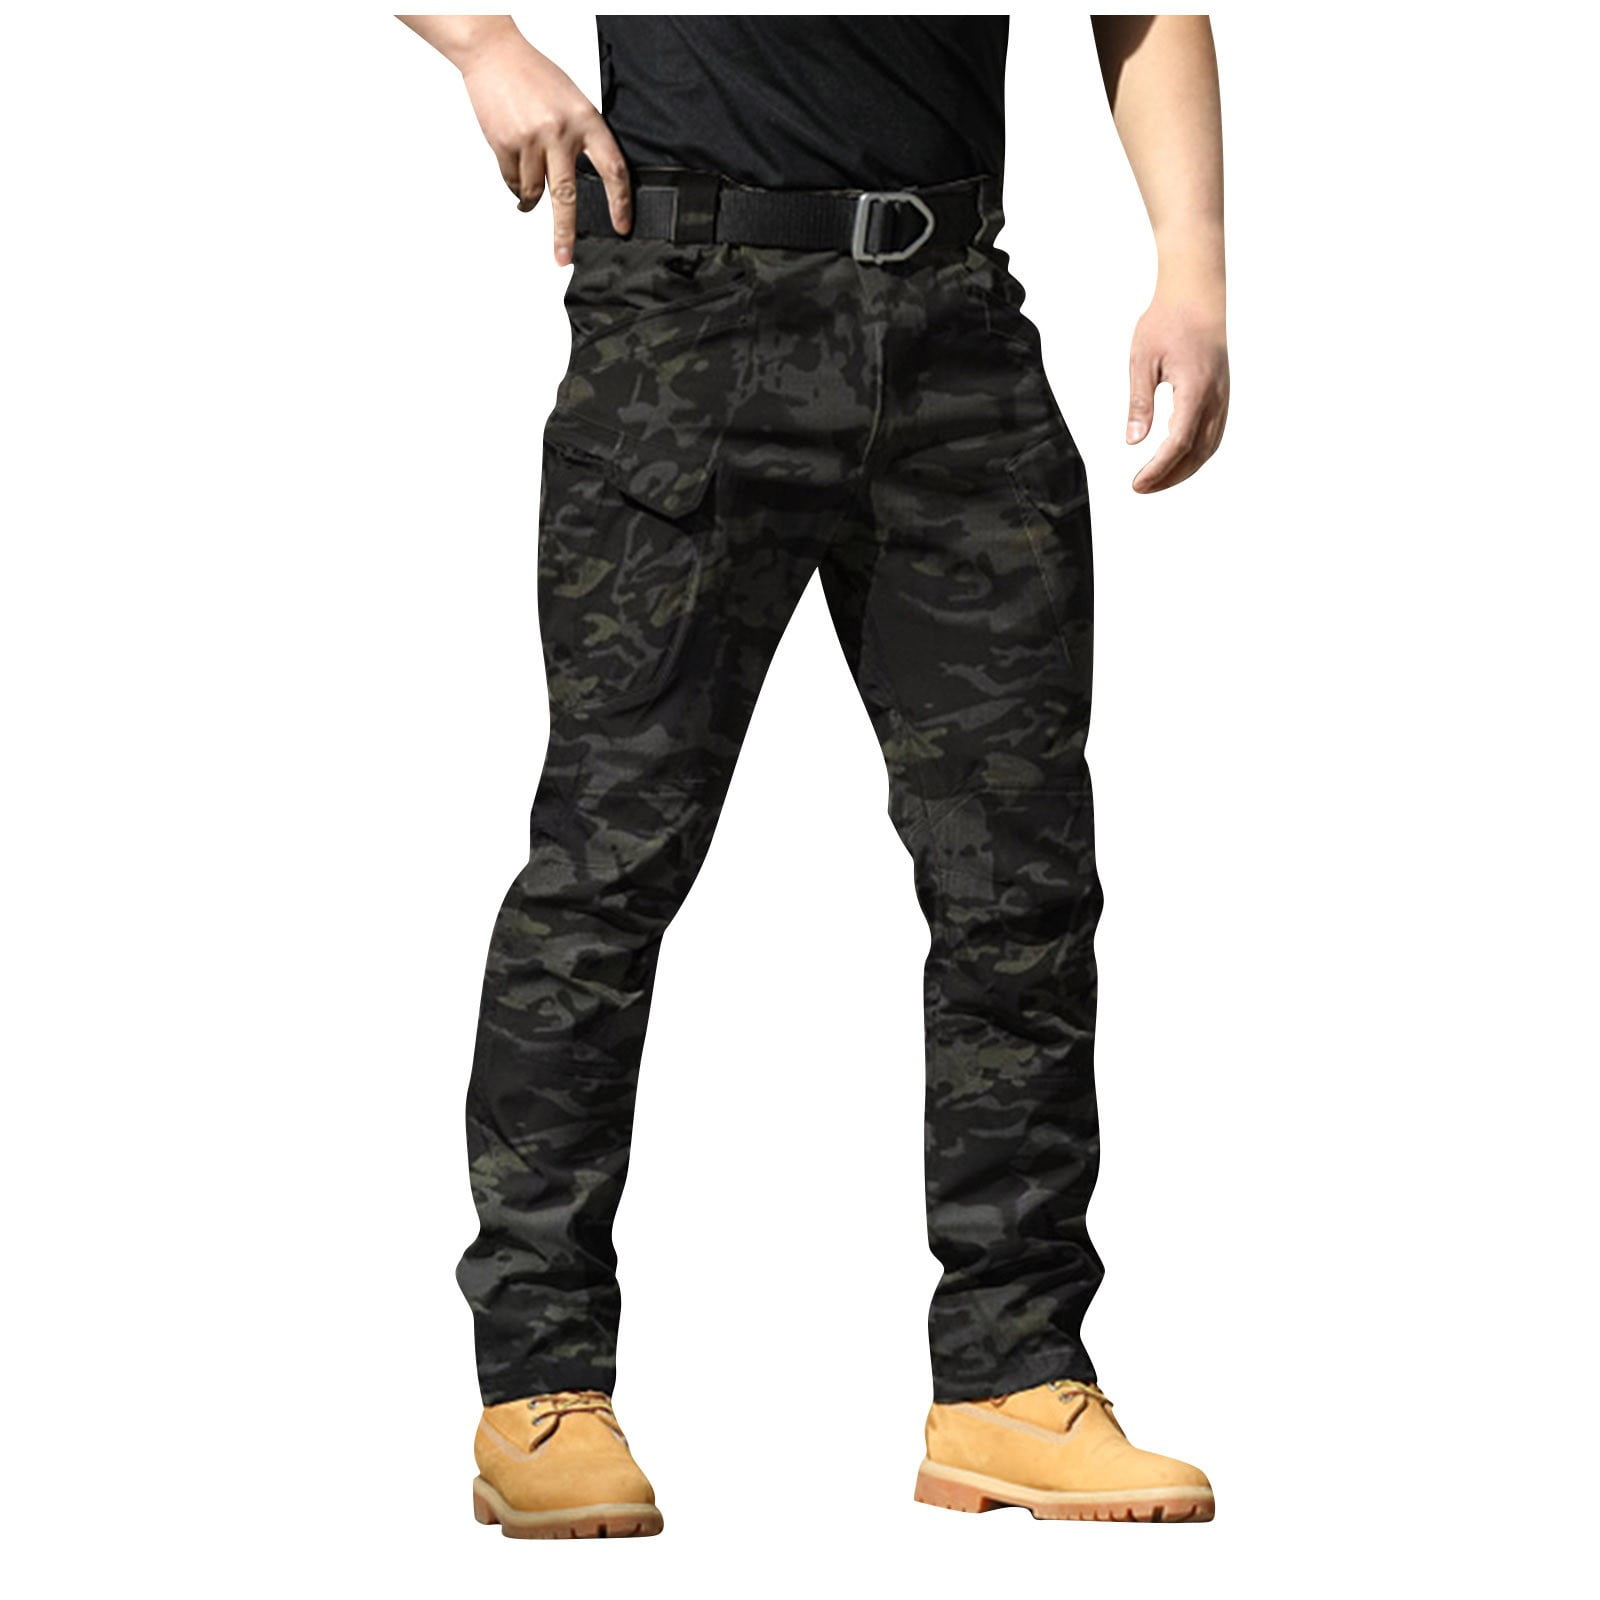 STCCLASSIC Men Stylish & Trendy Army J-5 Print Cargo Pants Military  Camouflage Track 100% Cotton Lower Casual Wear Multi Colour (Yellowish)  Size XL Pants for Men Slim Fit Stretchable Trousers Pants :